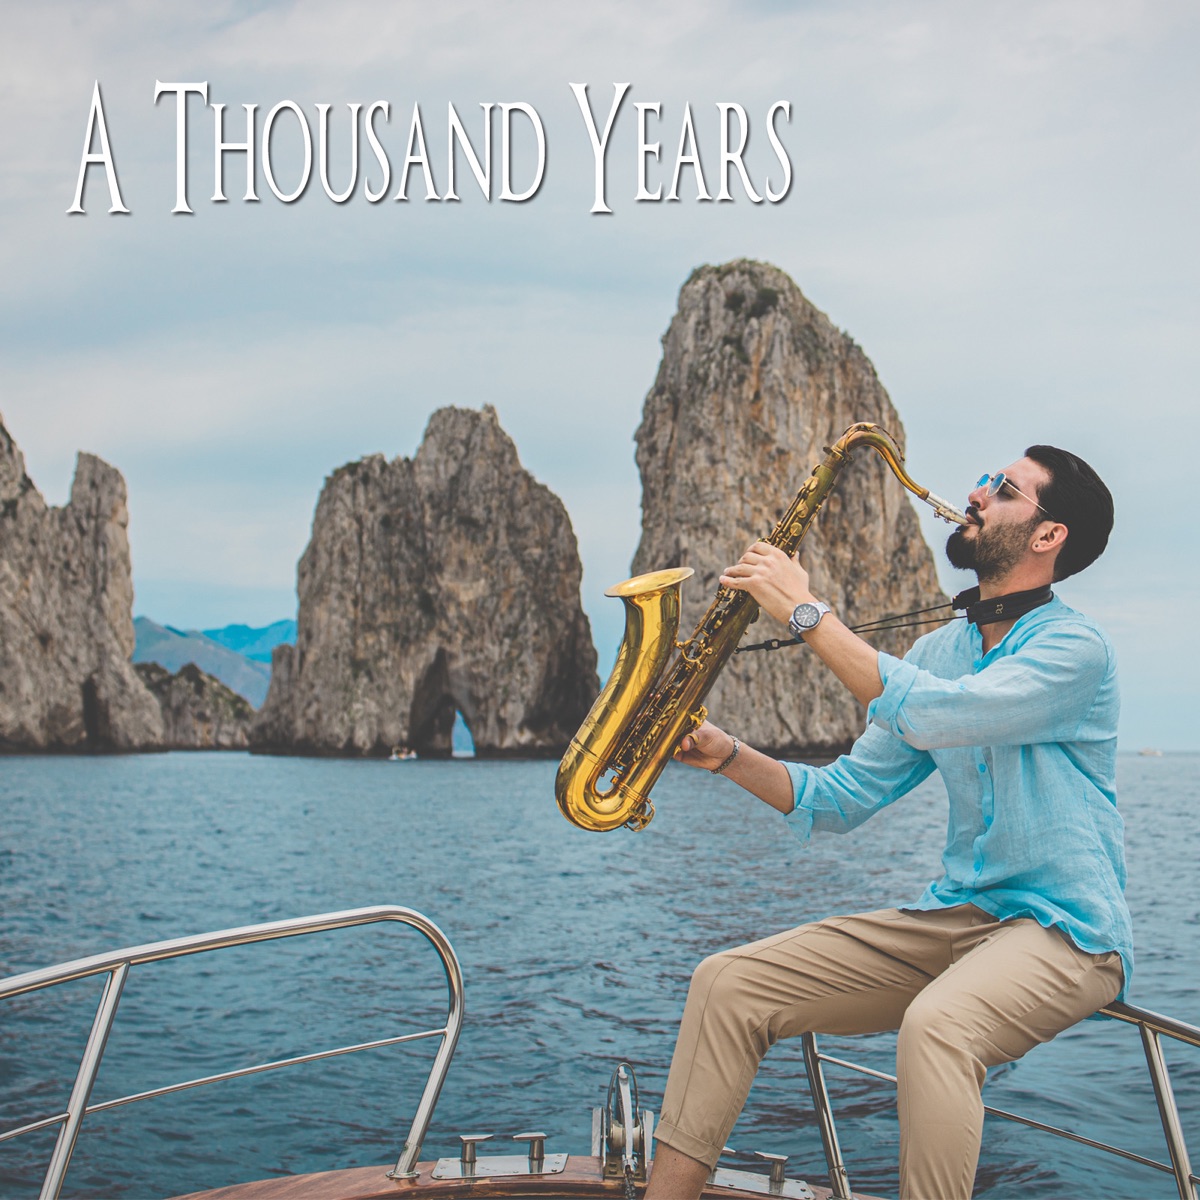 a thousand years free mp3 download